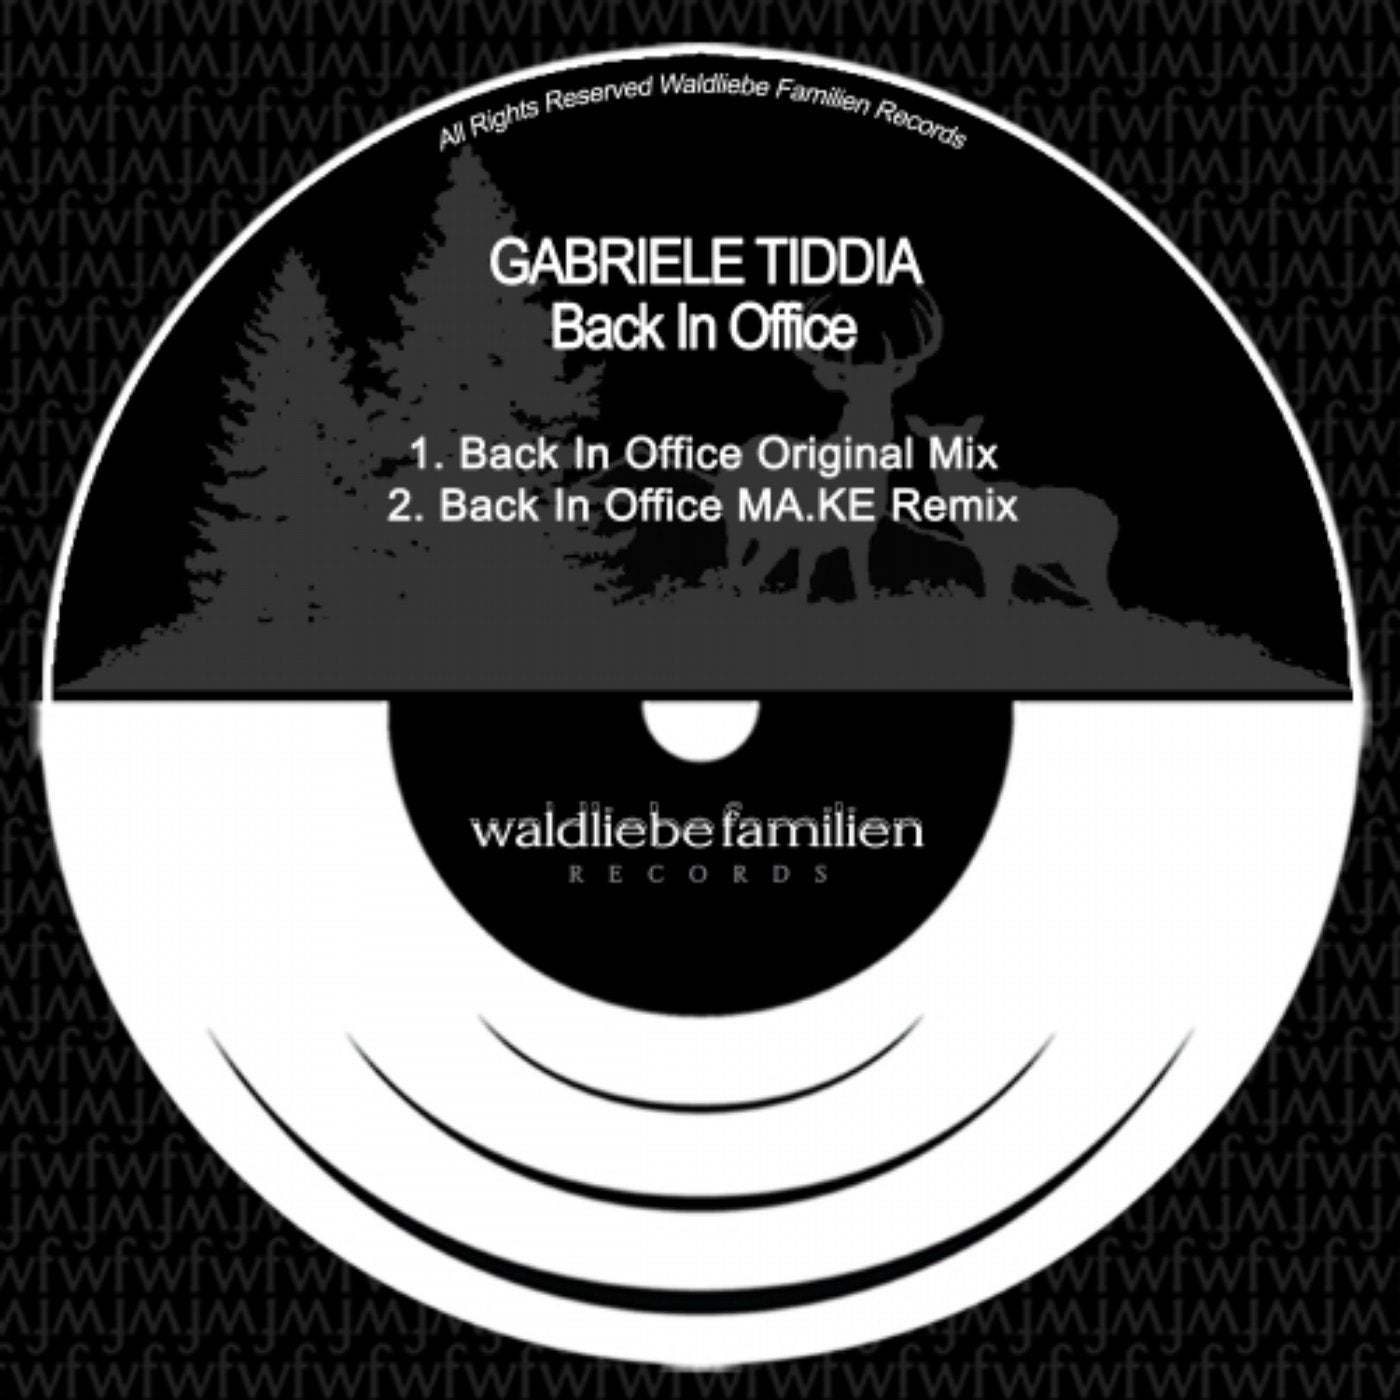 Back In Office (Original Mix) by Gabriele Tiddia on Beatport